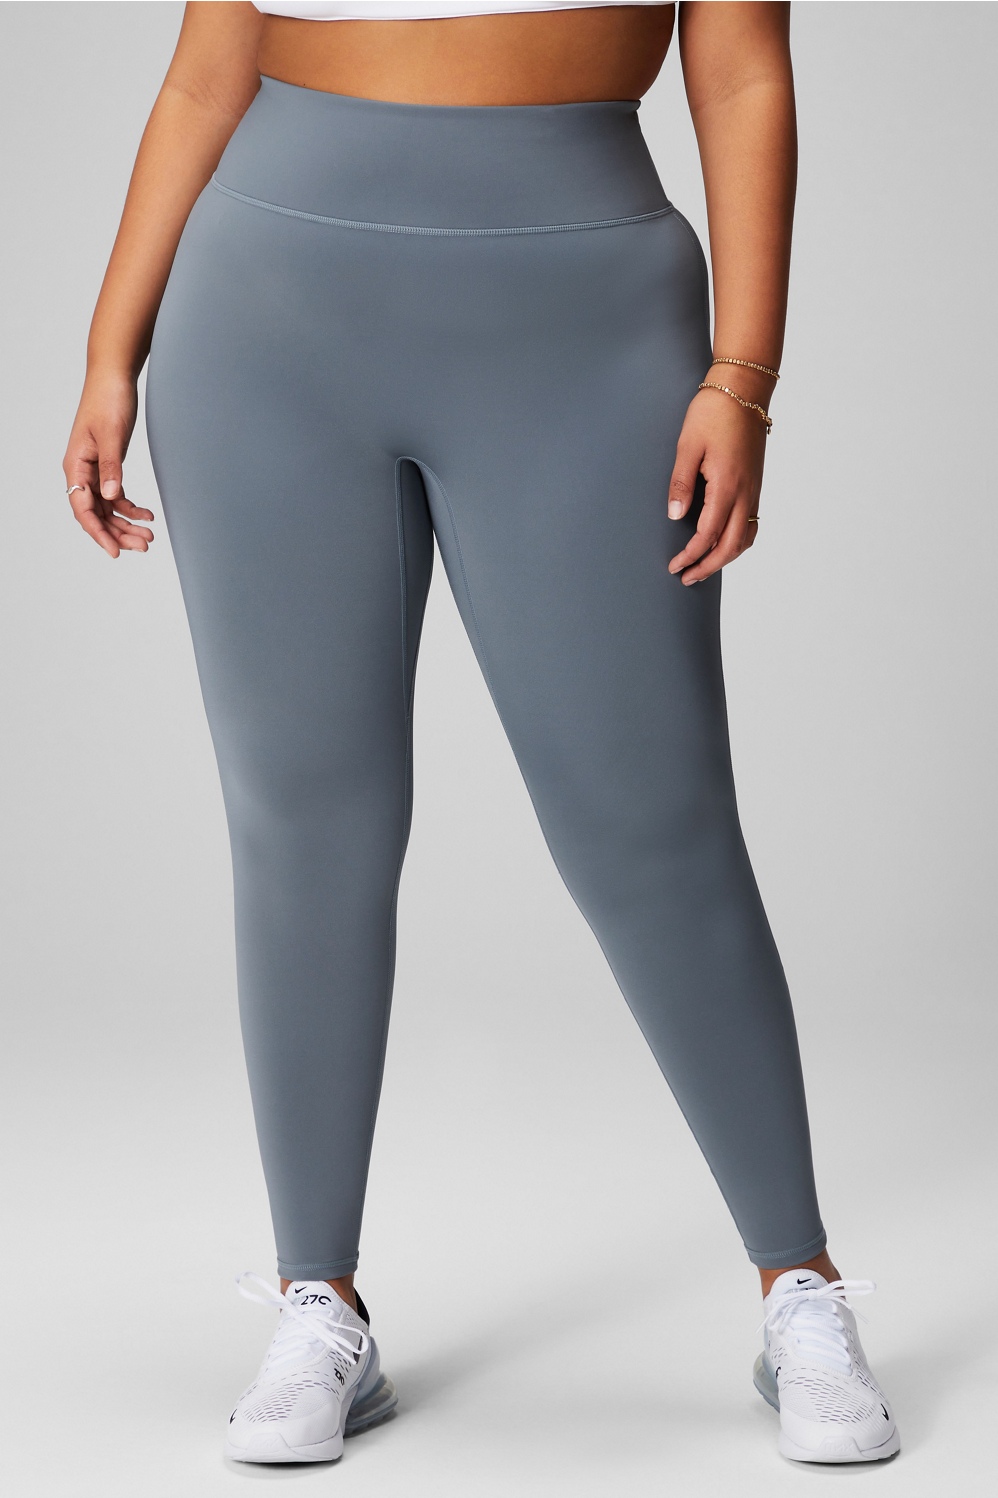 Fabletics Anywhere High-Waisted Legging Womens Night Shade plus Size 3X